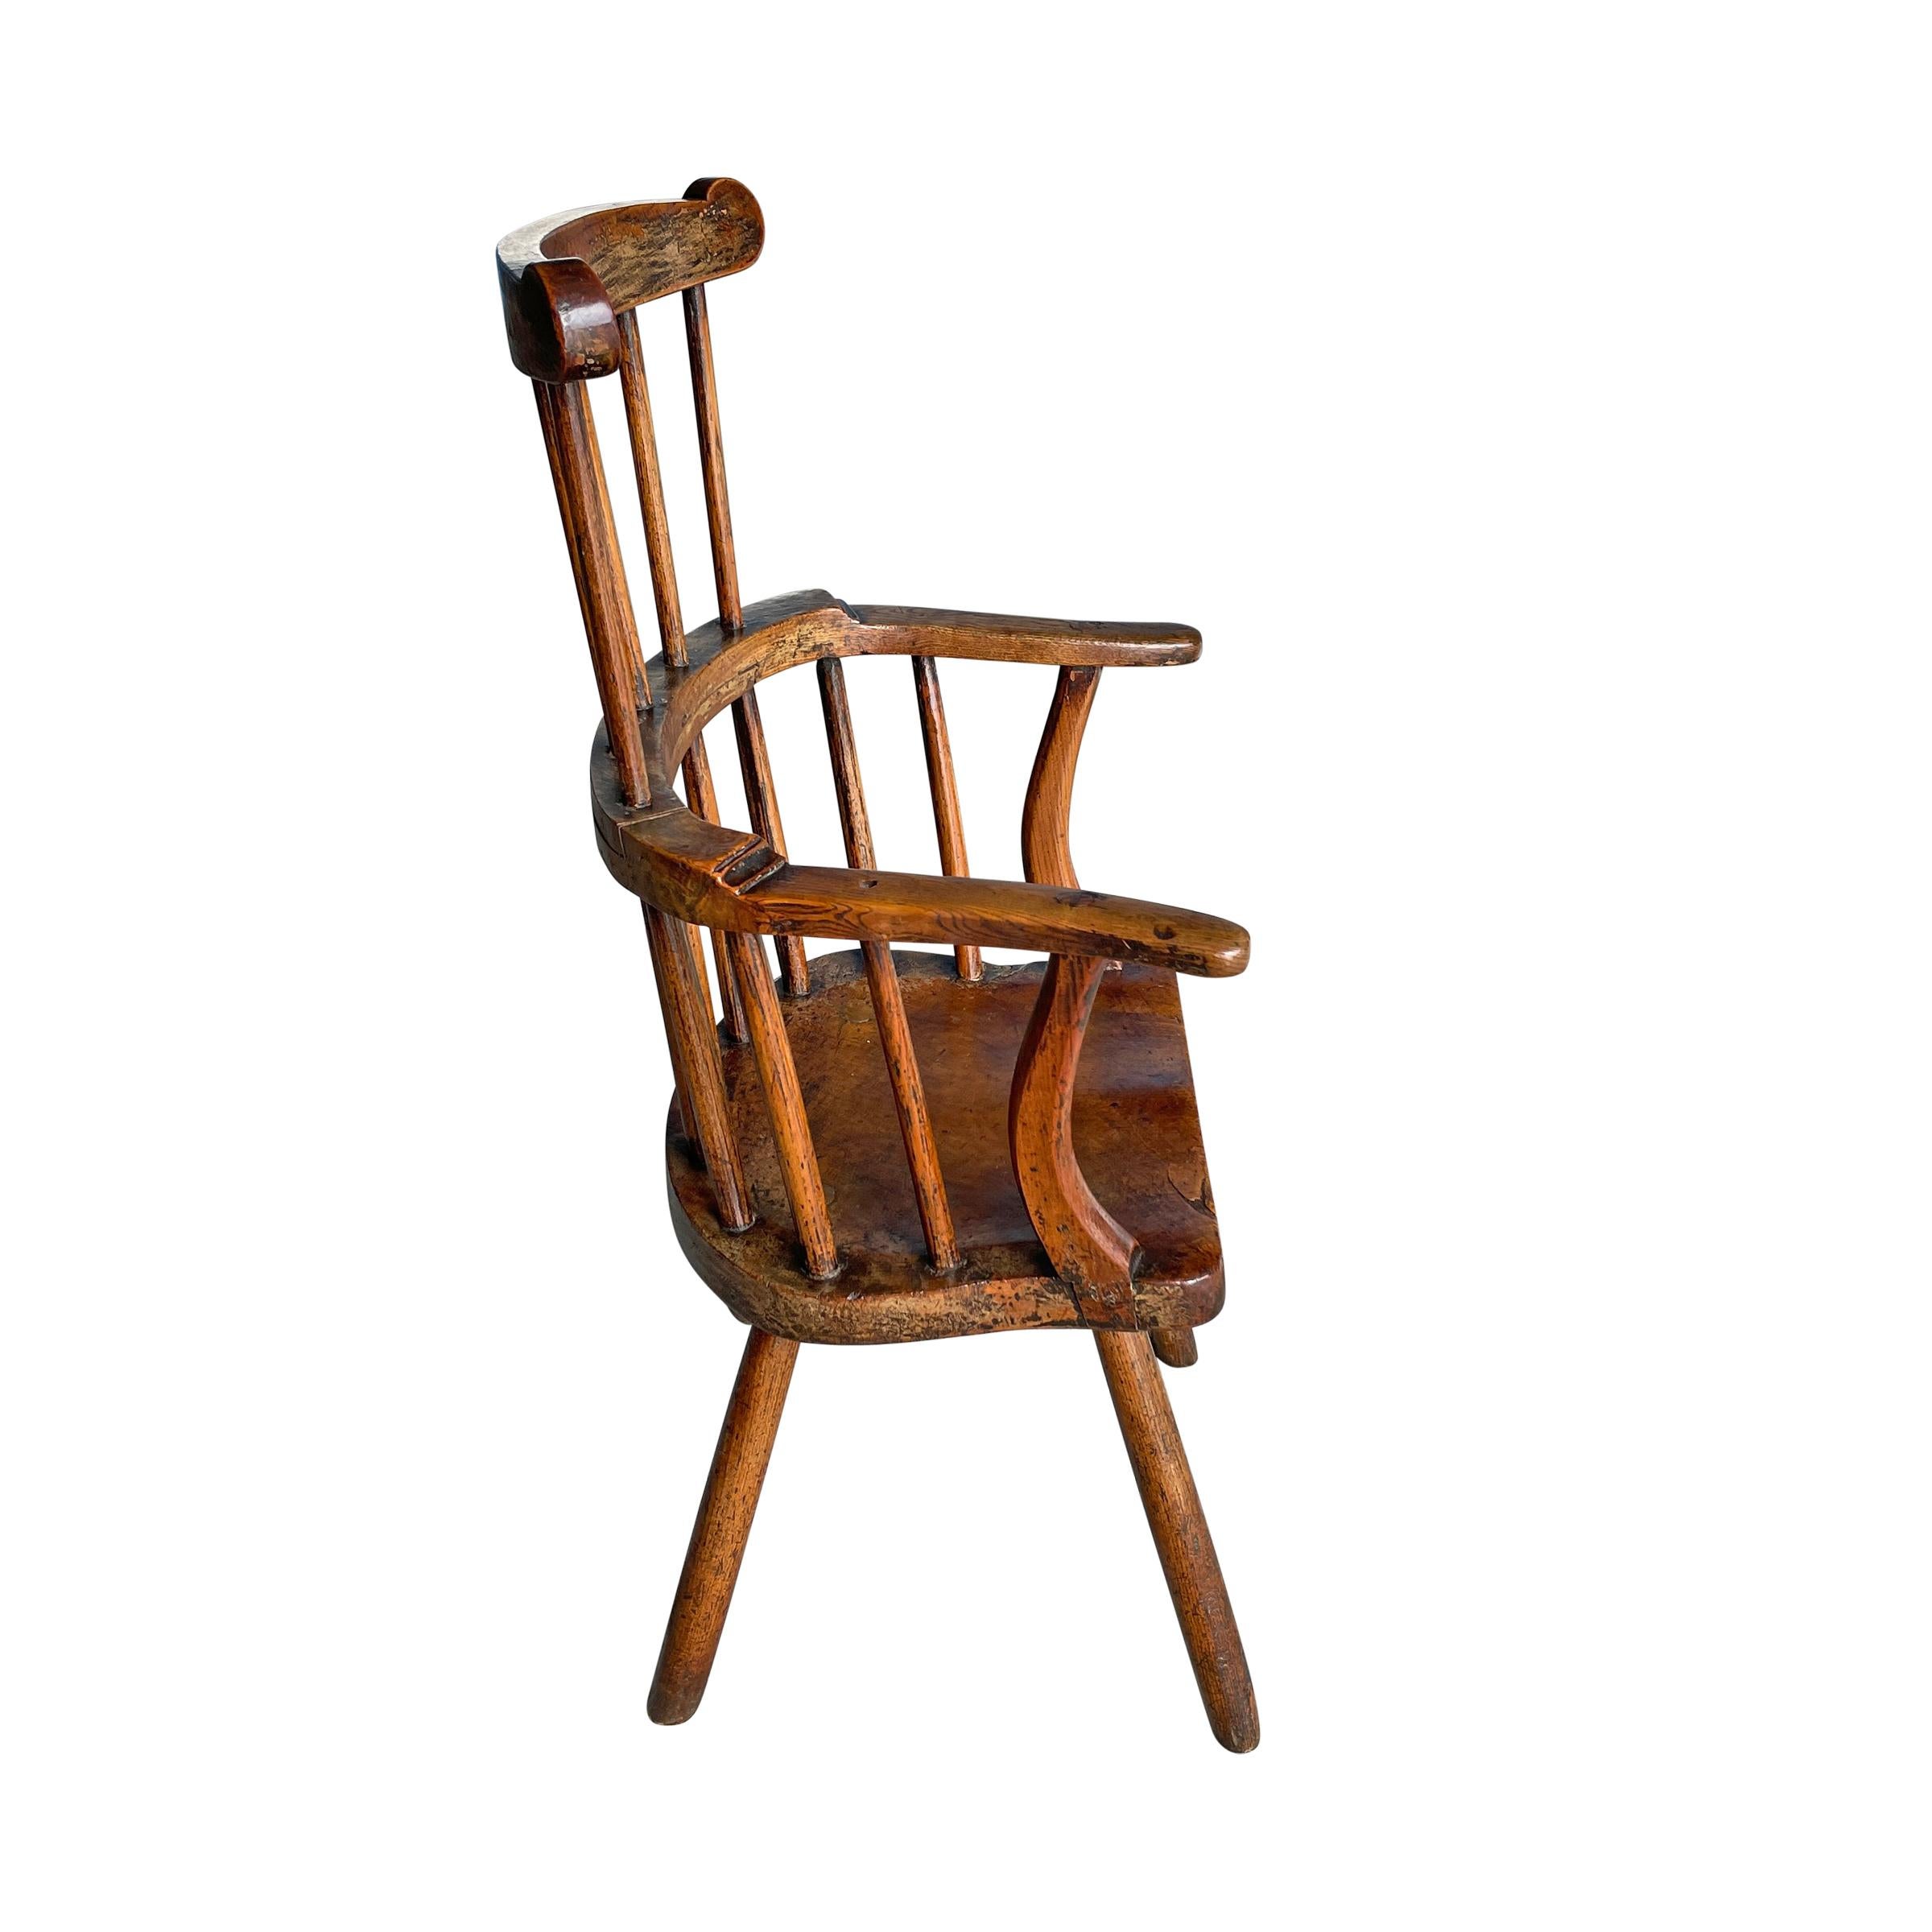 18th Century and Earlier 18th Century Welsh Stick Chair